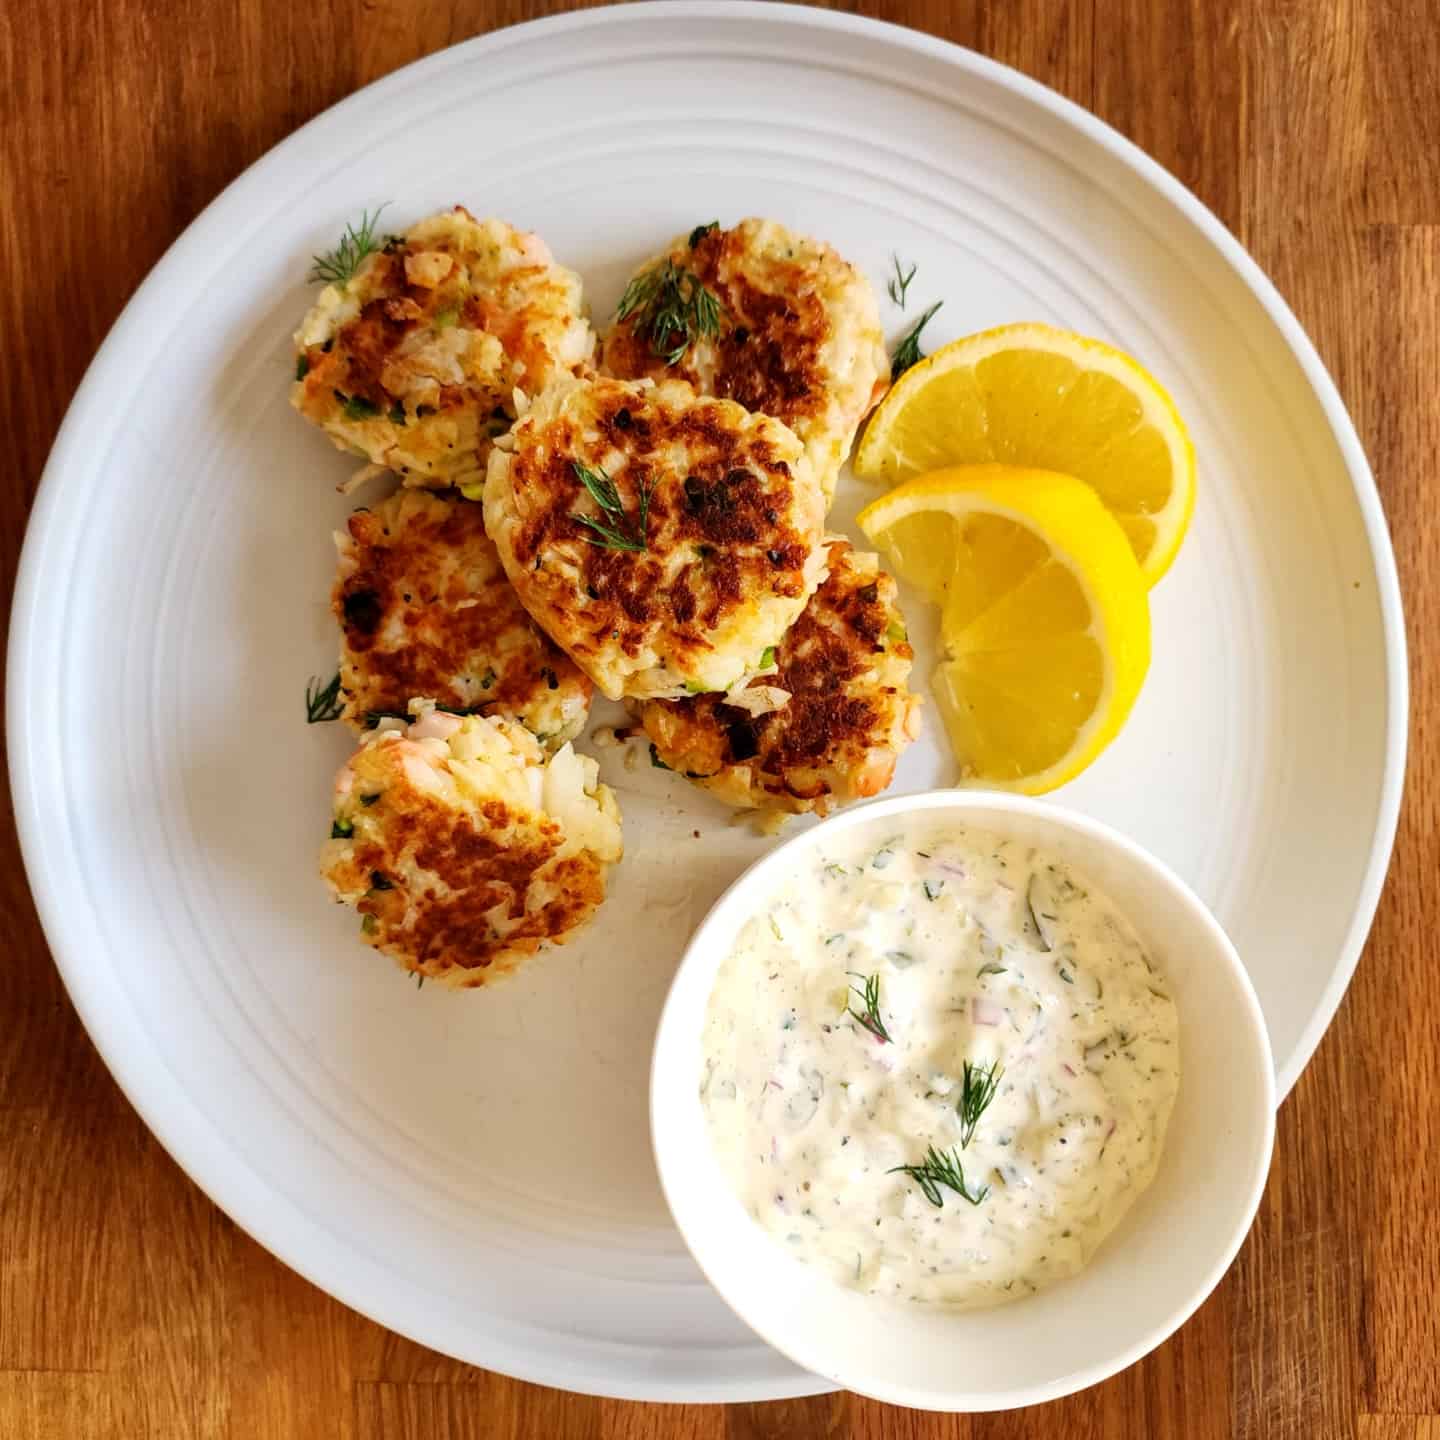 Crab cakes in serving plate